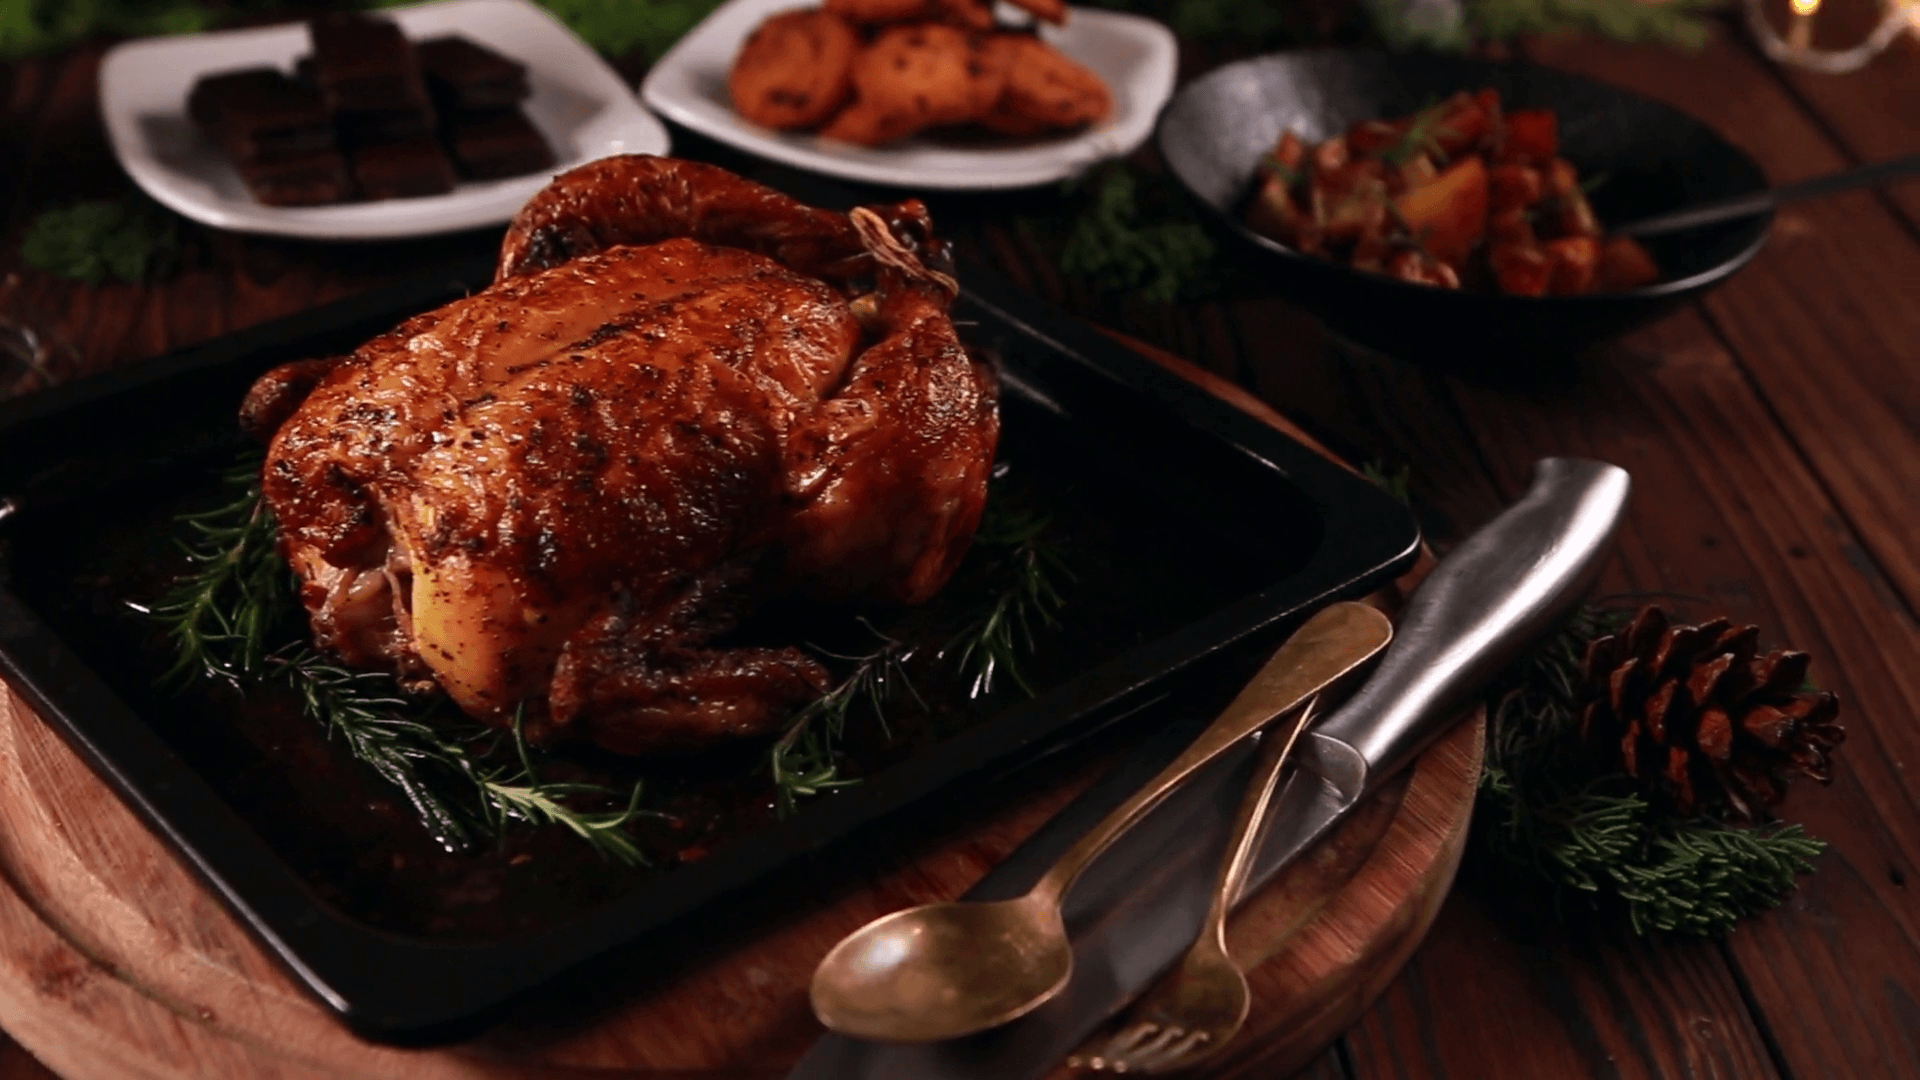 Christmas and new year's eve dinner: roasted whole chicken / turkey